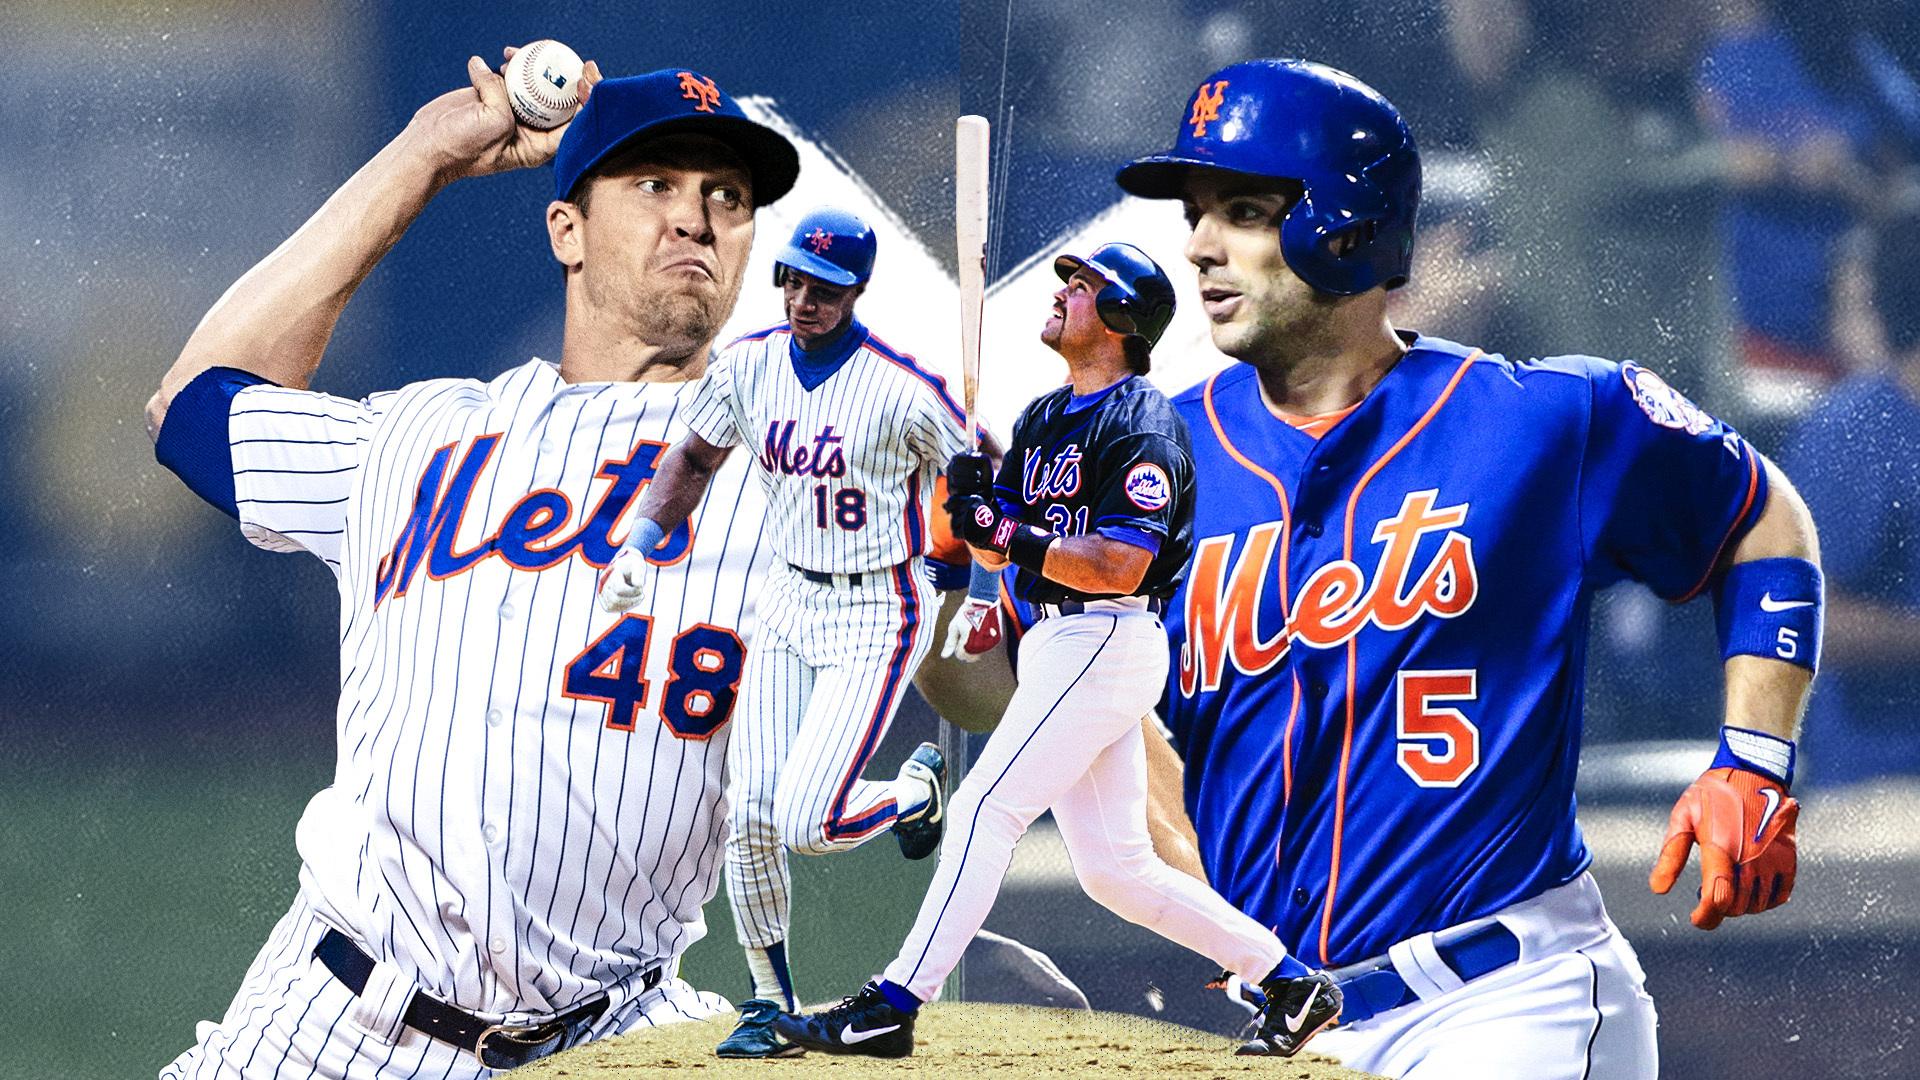 Jacob deGrom, Darryl Strawberry, Mike Piazza, and David Wright / USA TODAY Sports/SNY Treated Image